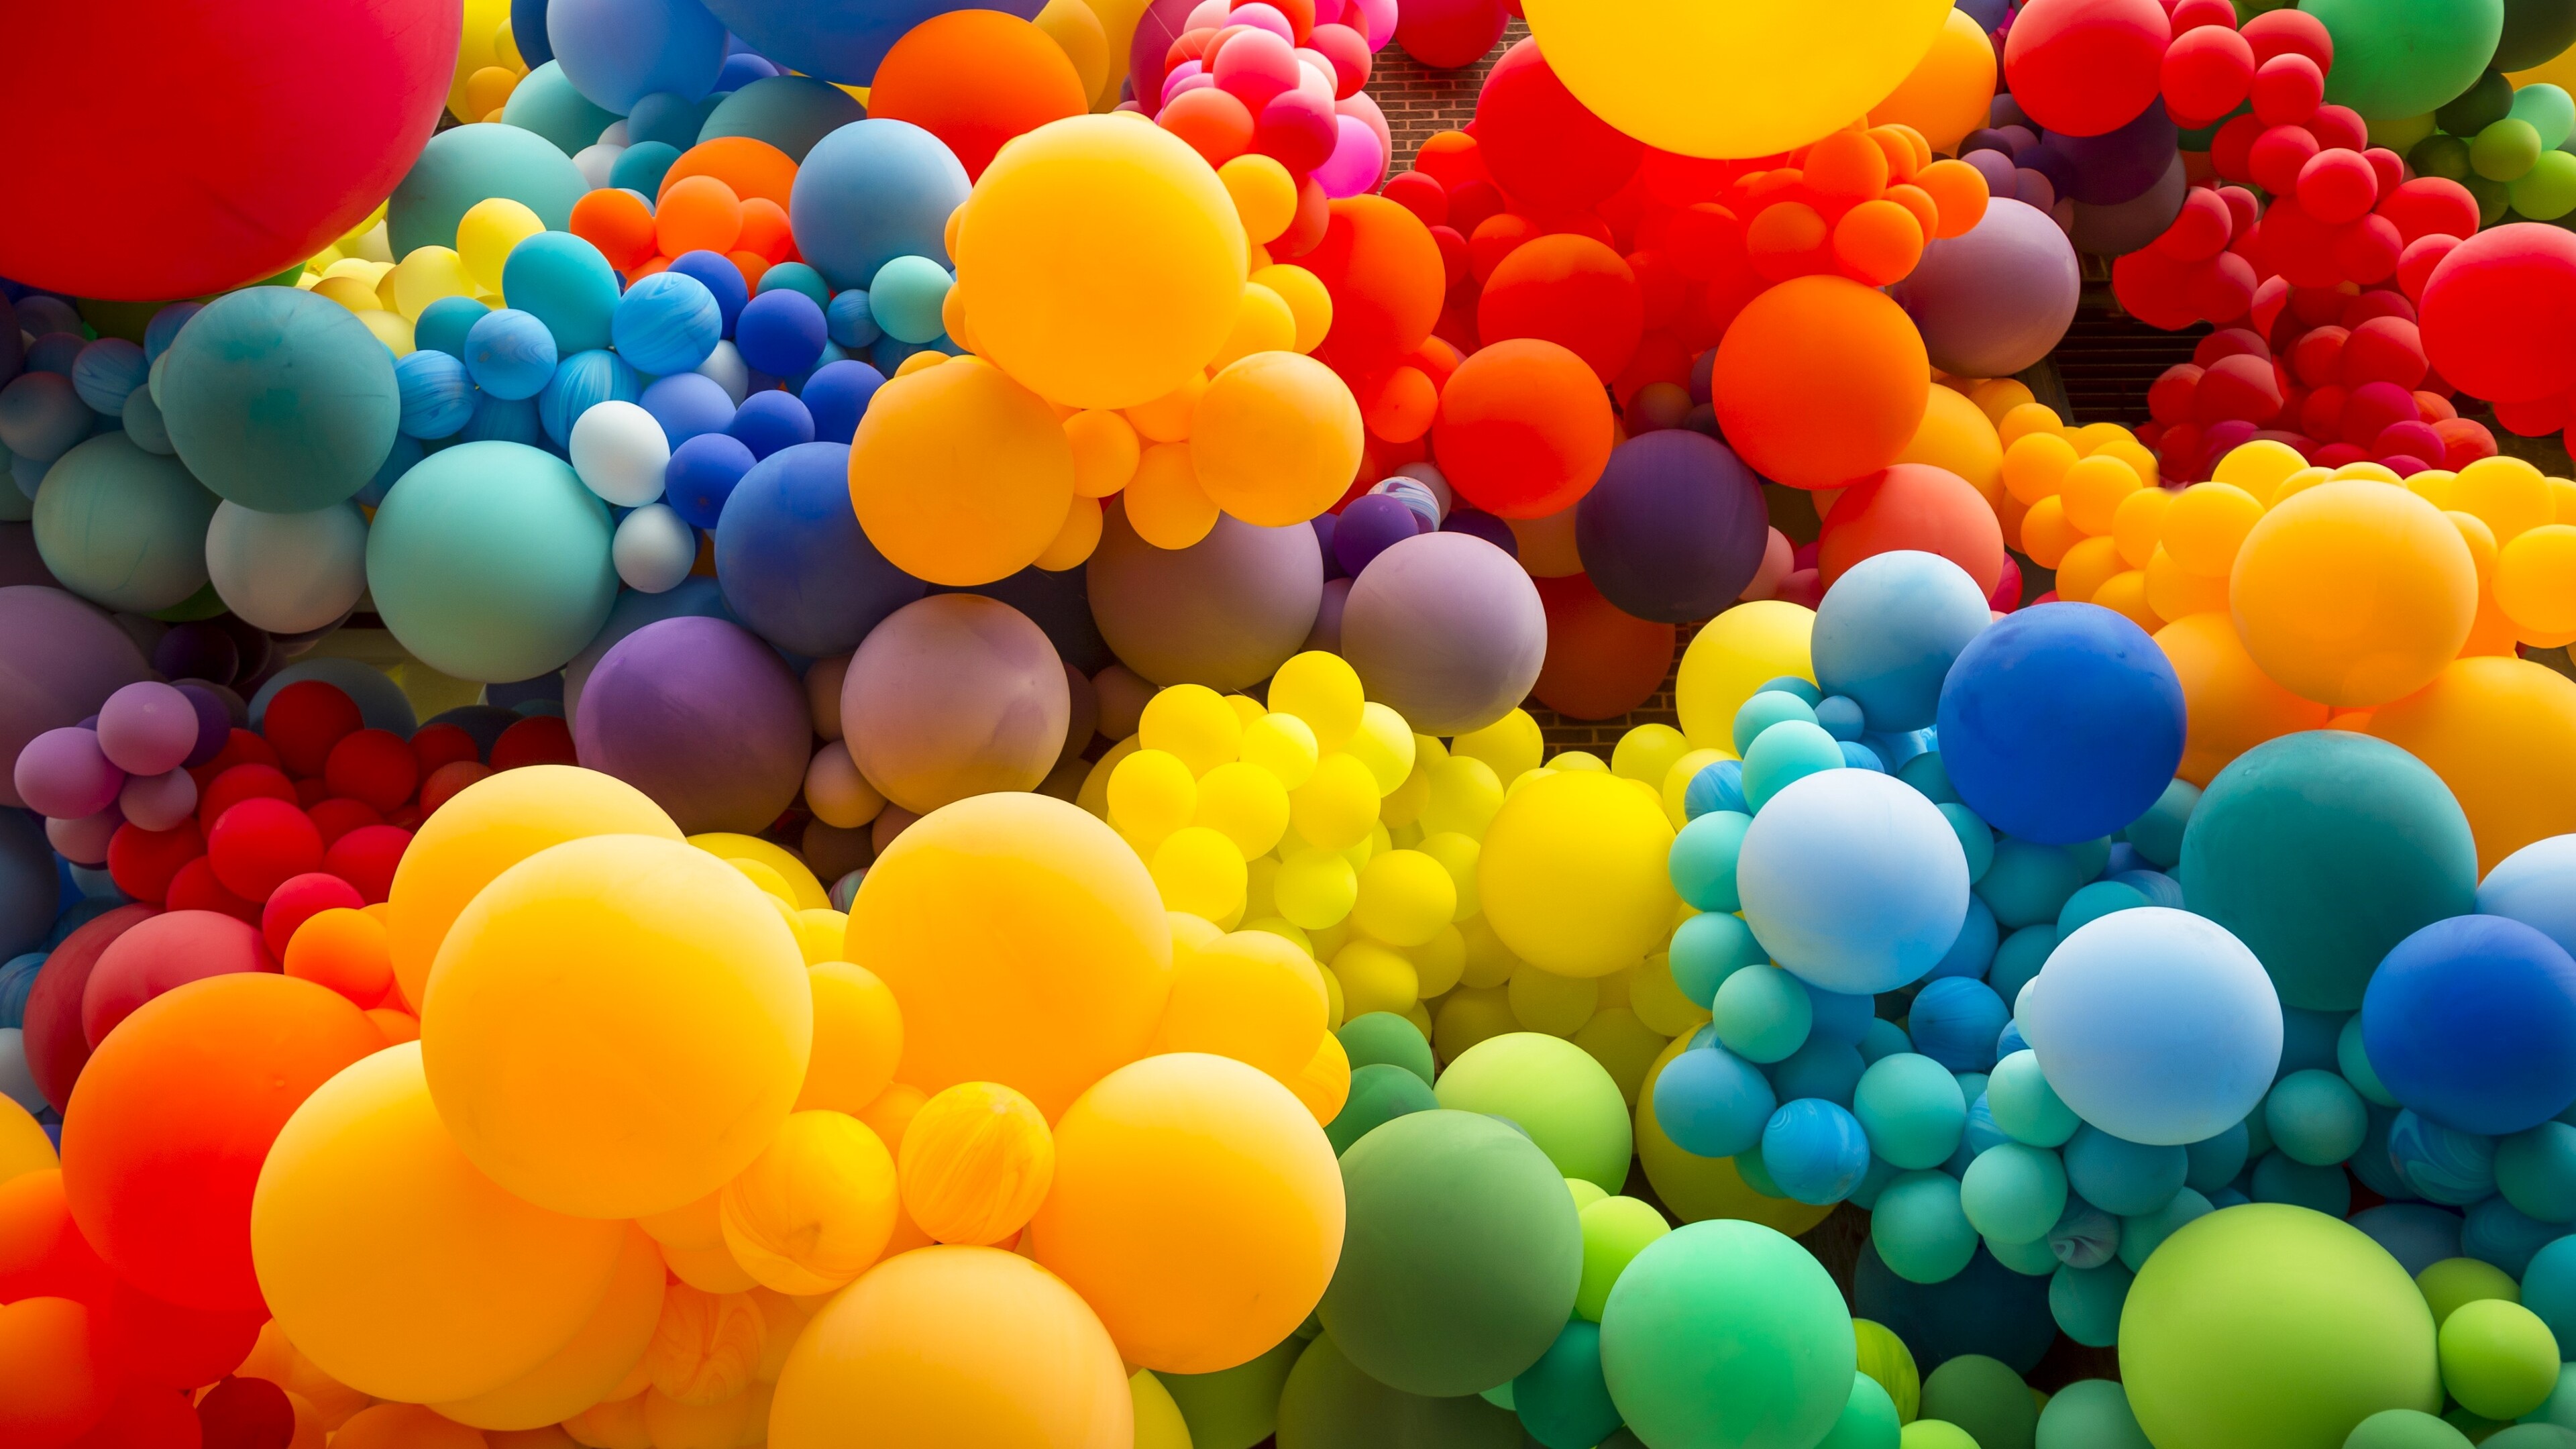 Balloons: Colors, A flexible bag that can be inflated with a gas. 3840x2160 4K Wallpaper.